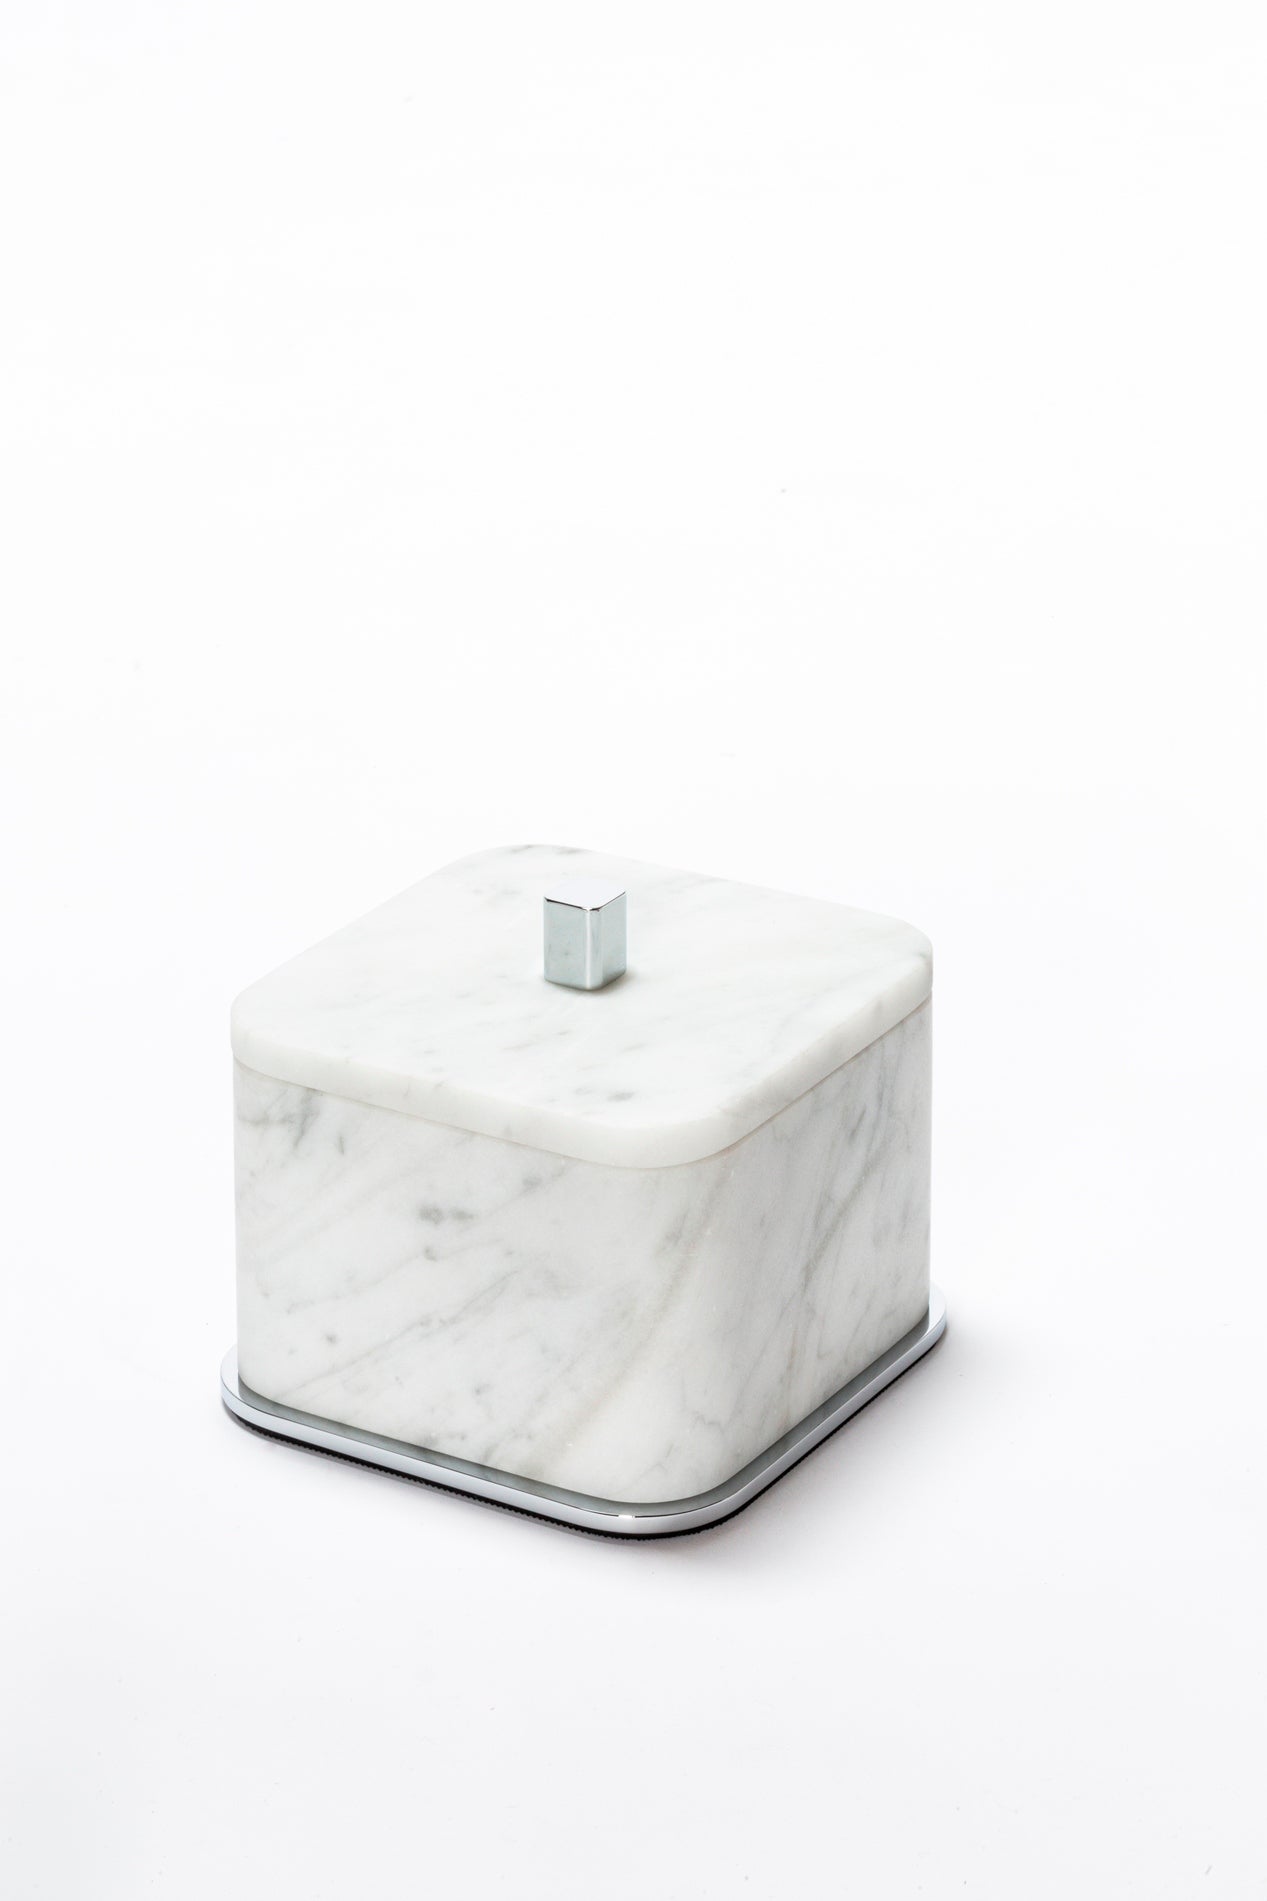 Giobagnara Polo Marble Bathroom Box | Marble Structure with Brass Base Frame | Non-Slip Waterproof Rubber Base | Part of Polo Marble Bathroom Set | Iconic Silhouette with Rounded Corners | Unique and Exclusive Design | Explore the Polo Marble Bathroom Collection at 2Jour Concierge, #1 luxury high-end gift & lifestyle shop